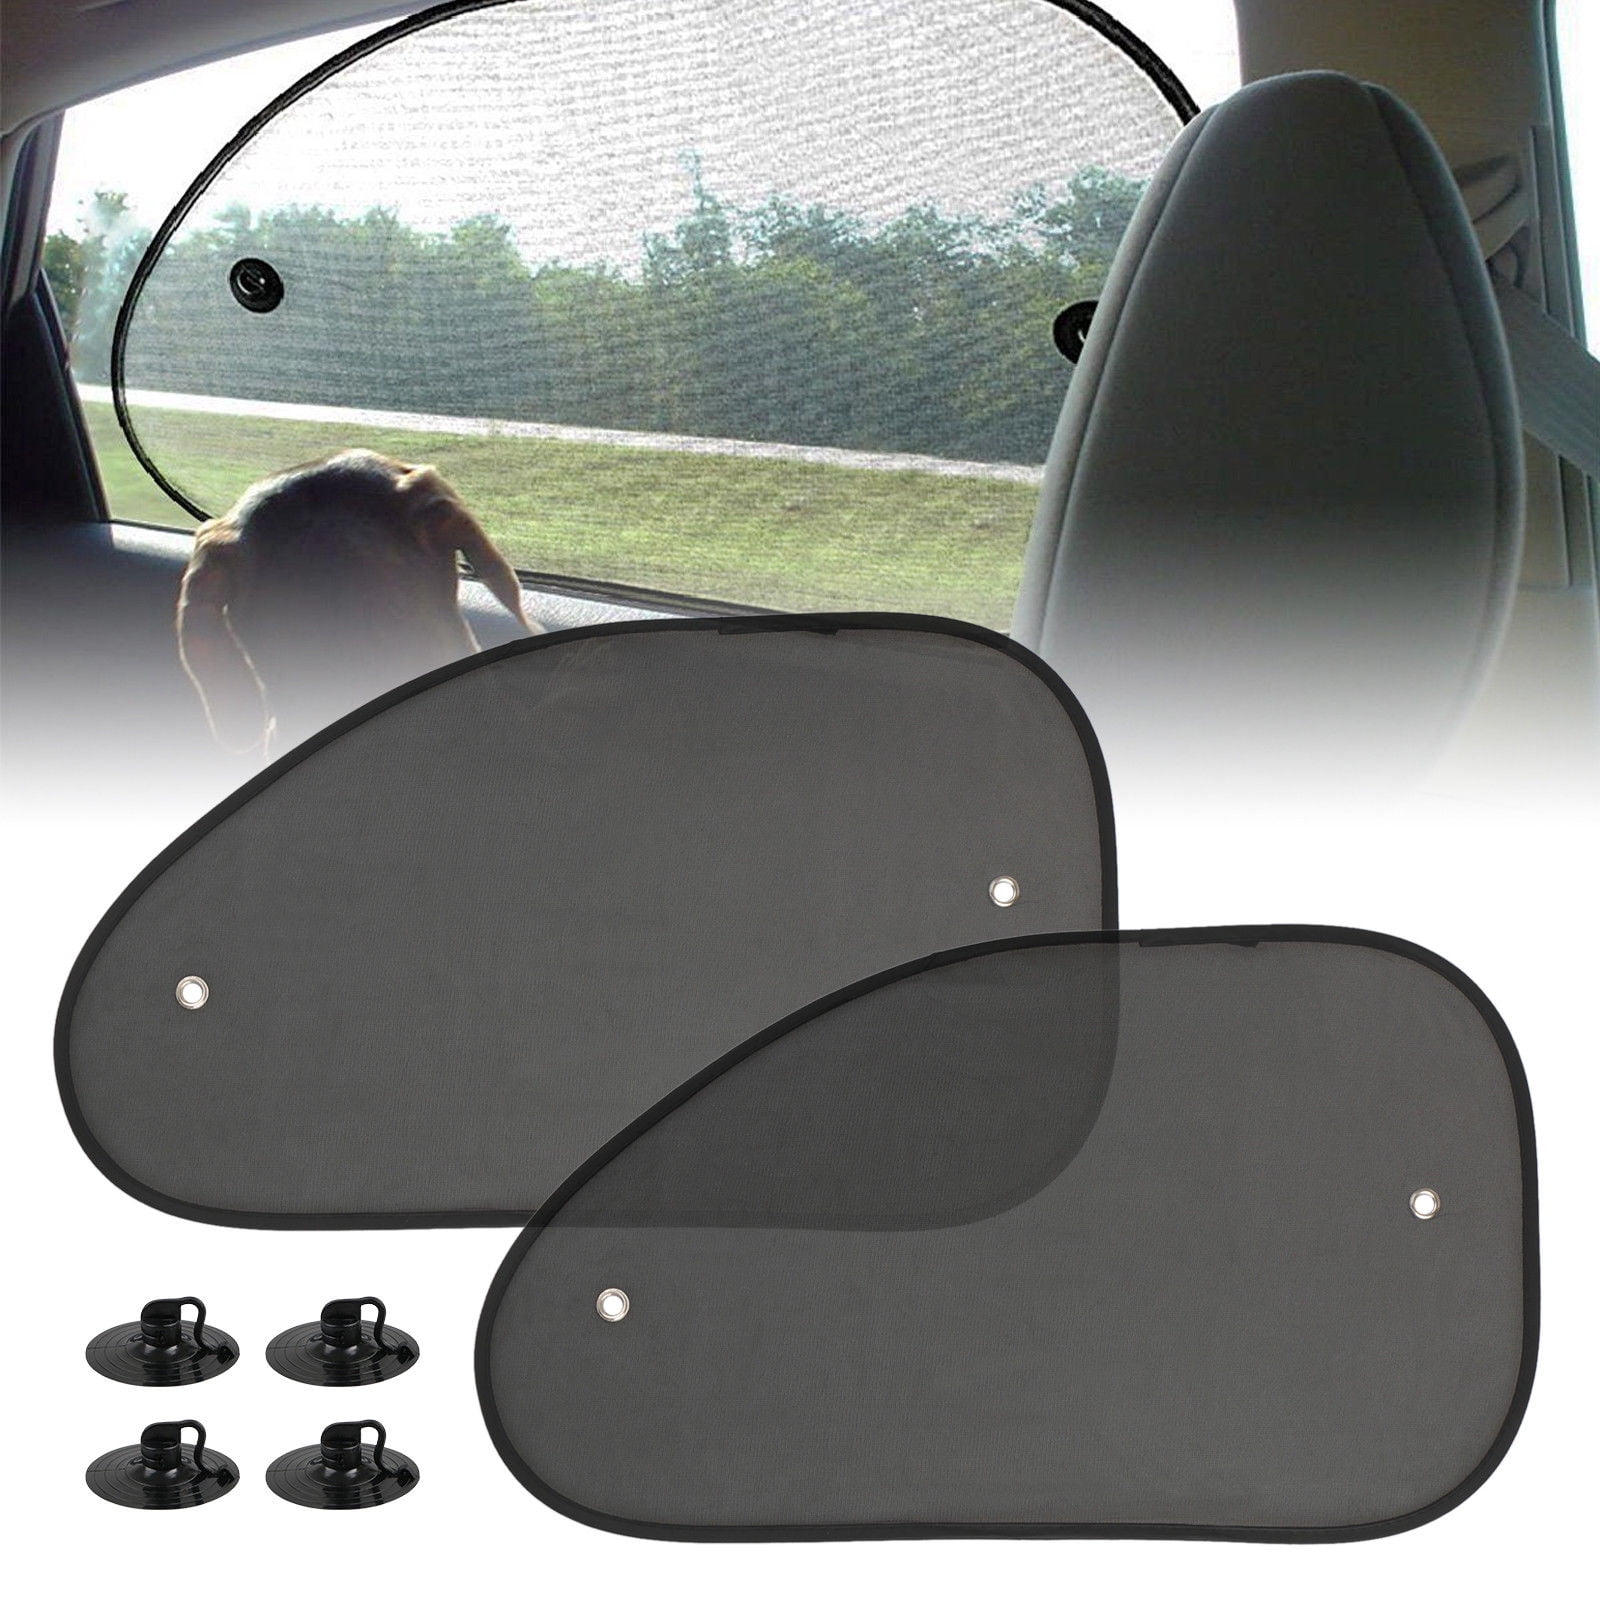 2 pcs Car Sun Shades Cover Blocker for Rear Side Window Baby Kids UV Protection 